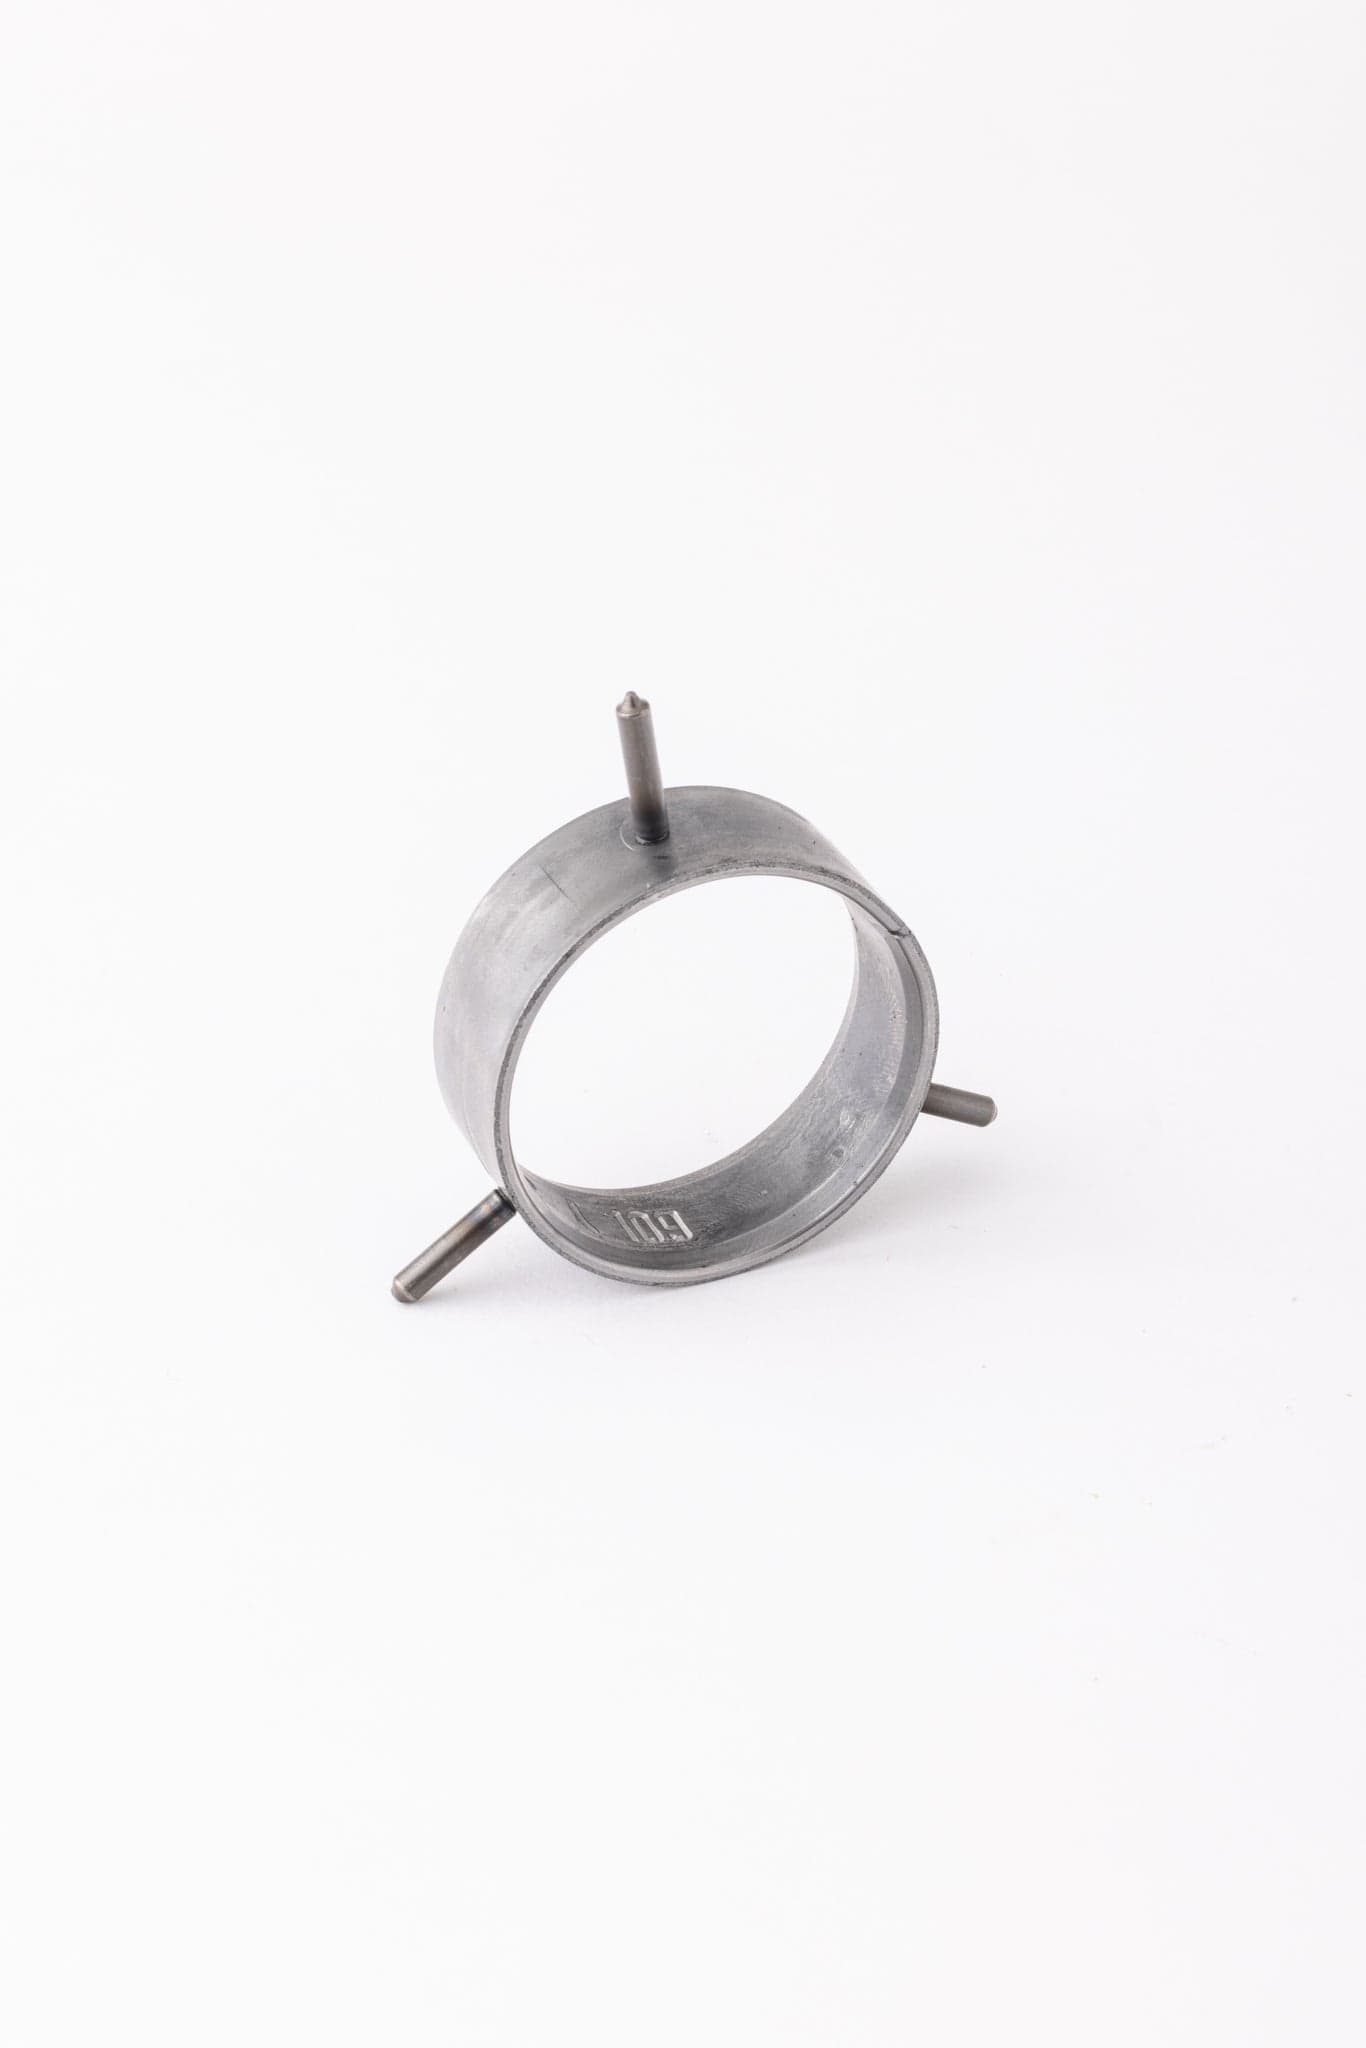 46 mm / 2 inch Spring Hook Nickel Finish (40mm wide d ring) – Tantalizing  Stitches